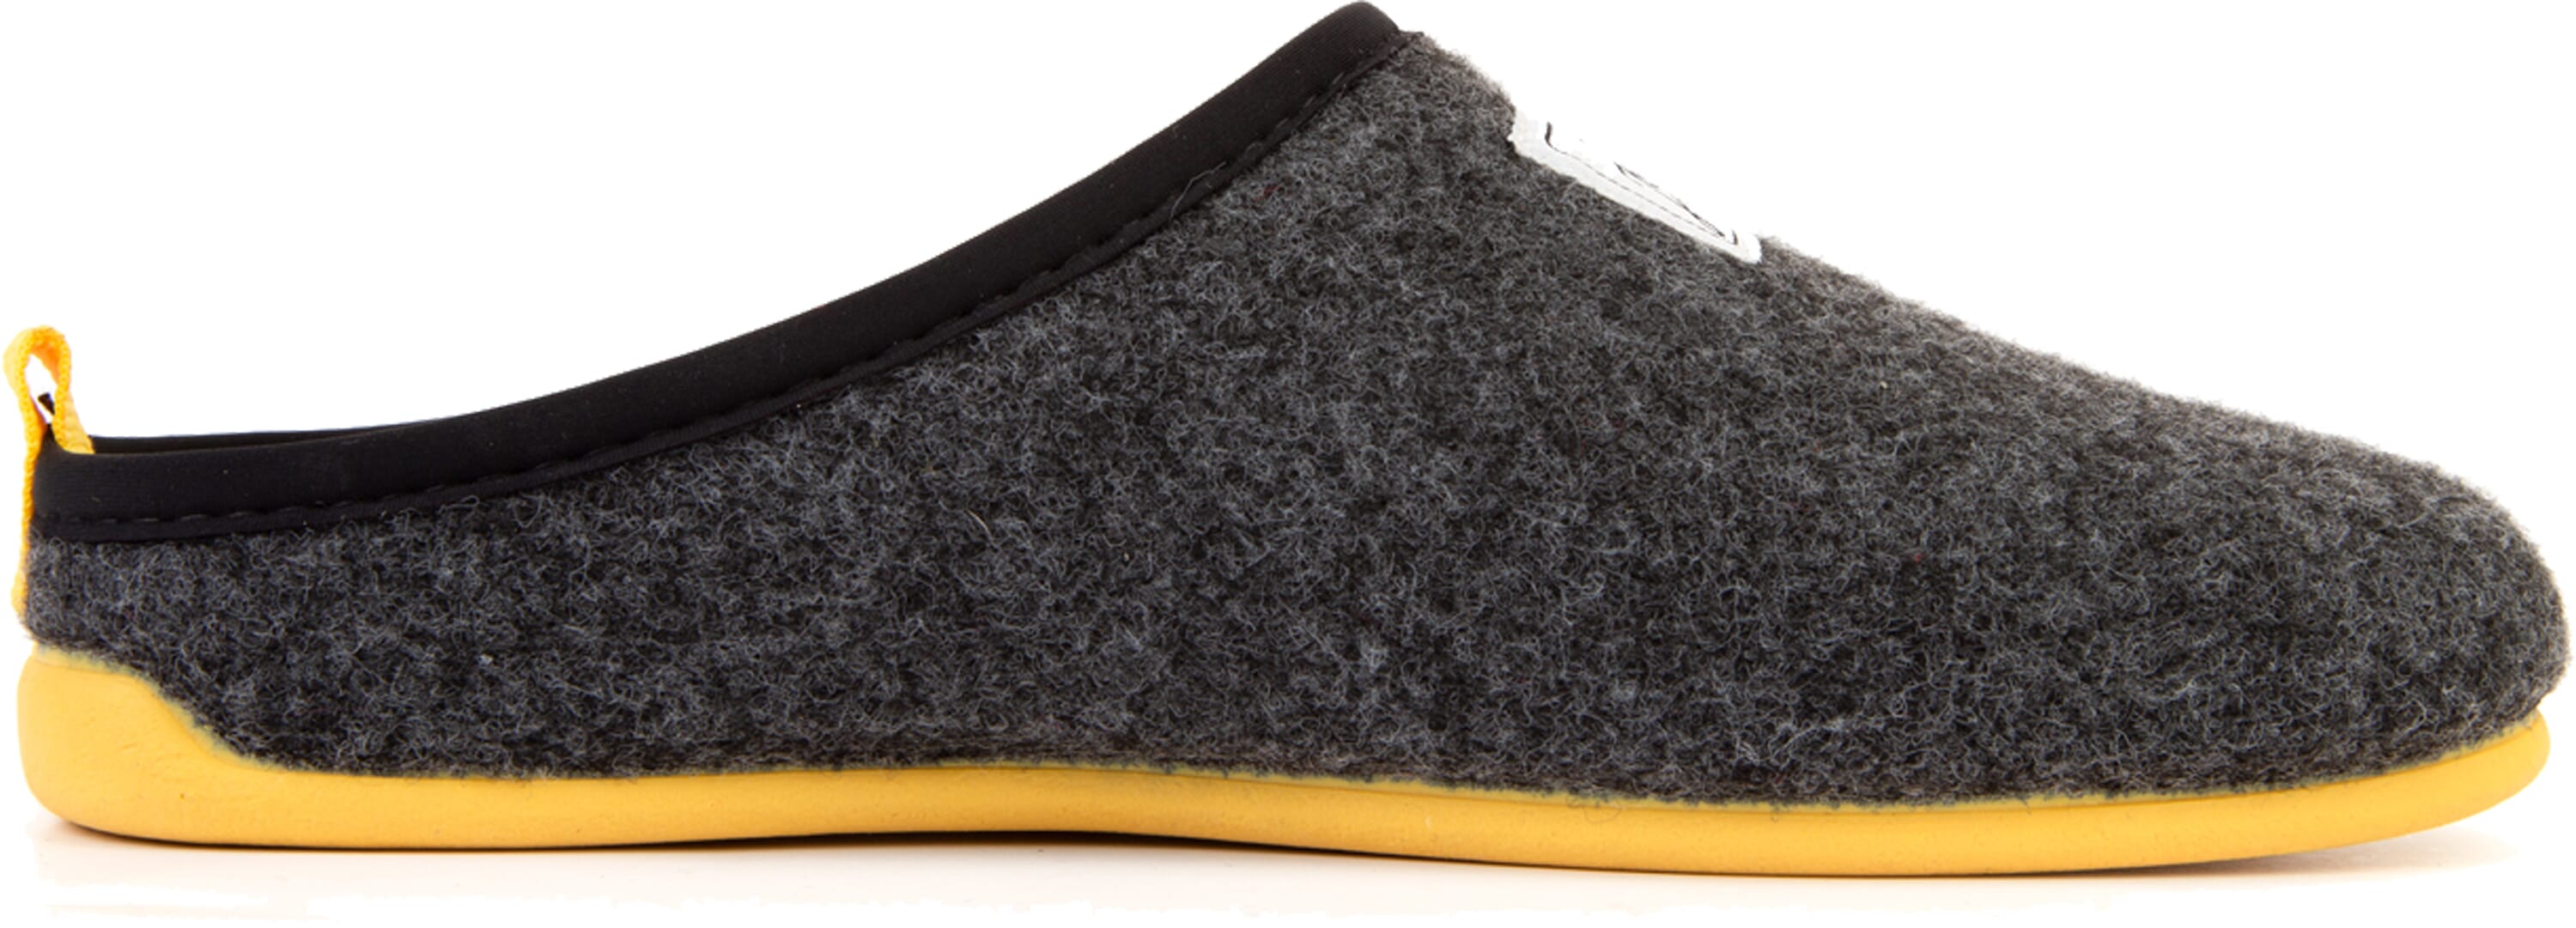 Sustainable slippers for eco-friendly 